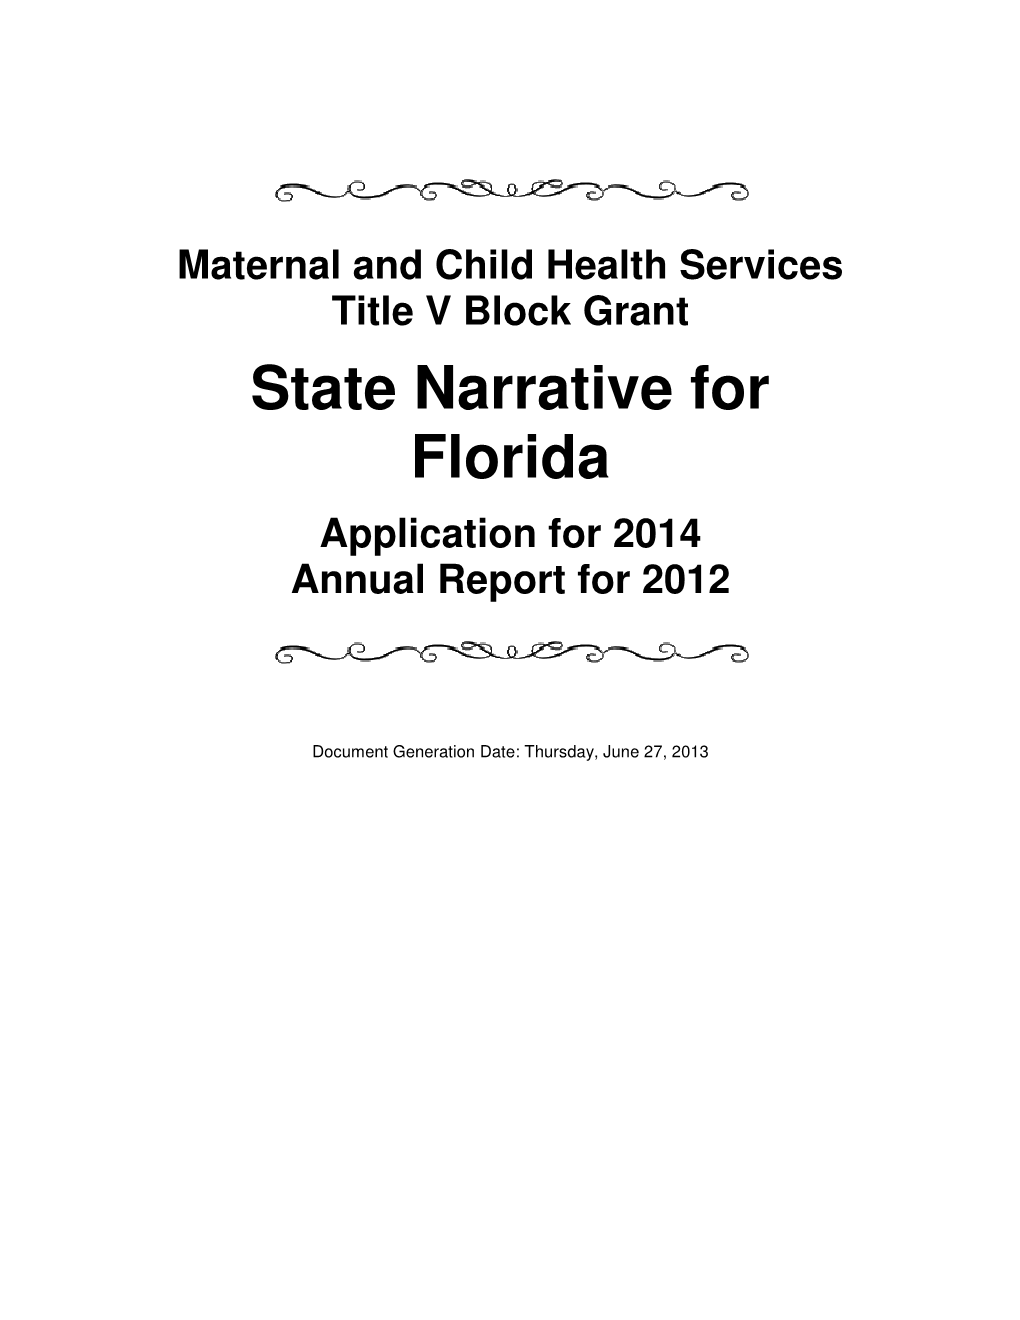 State Narrative for Florida